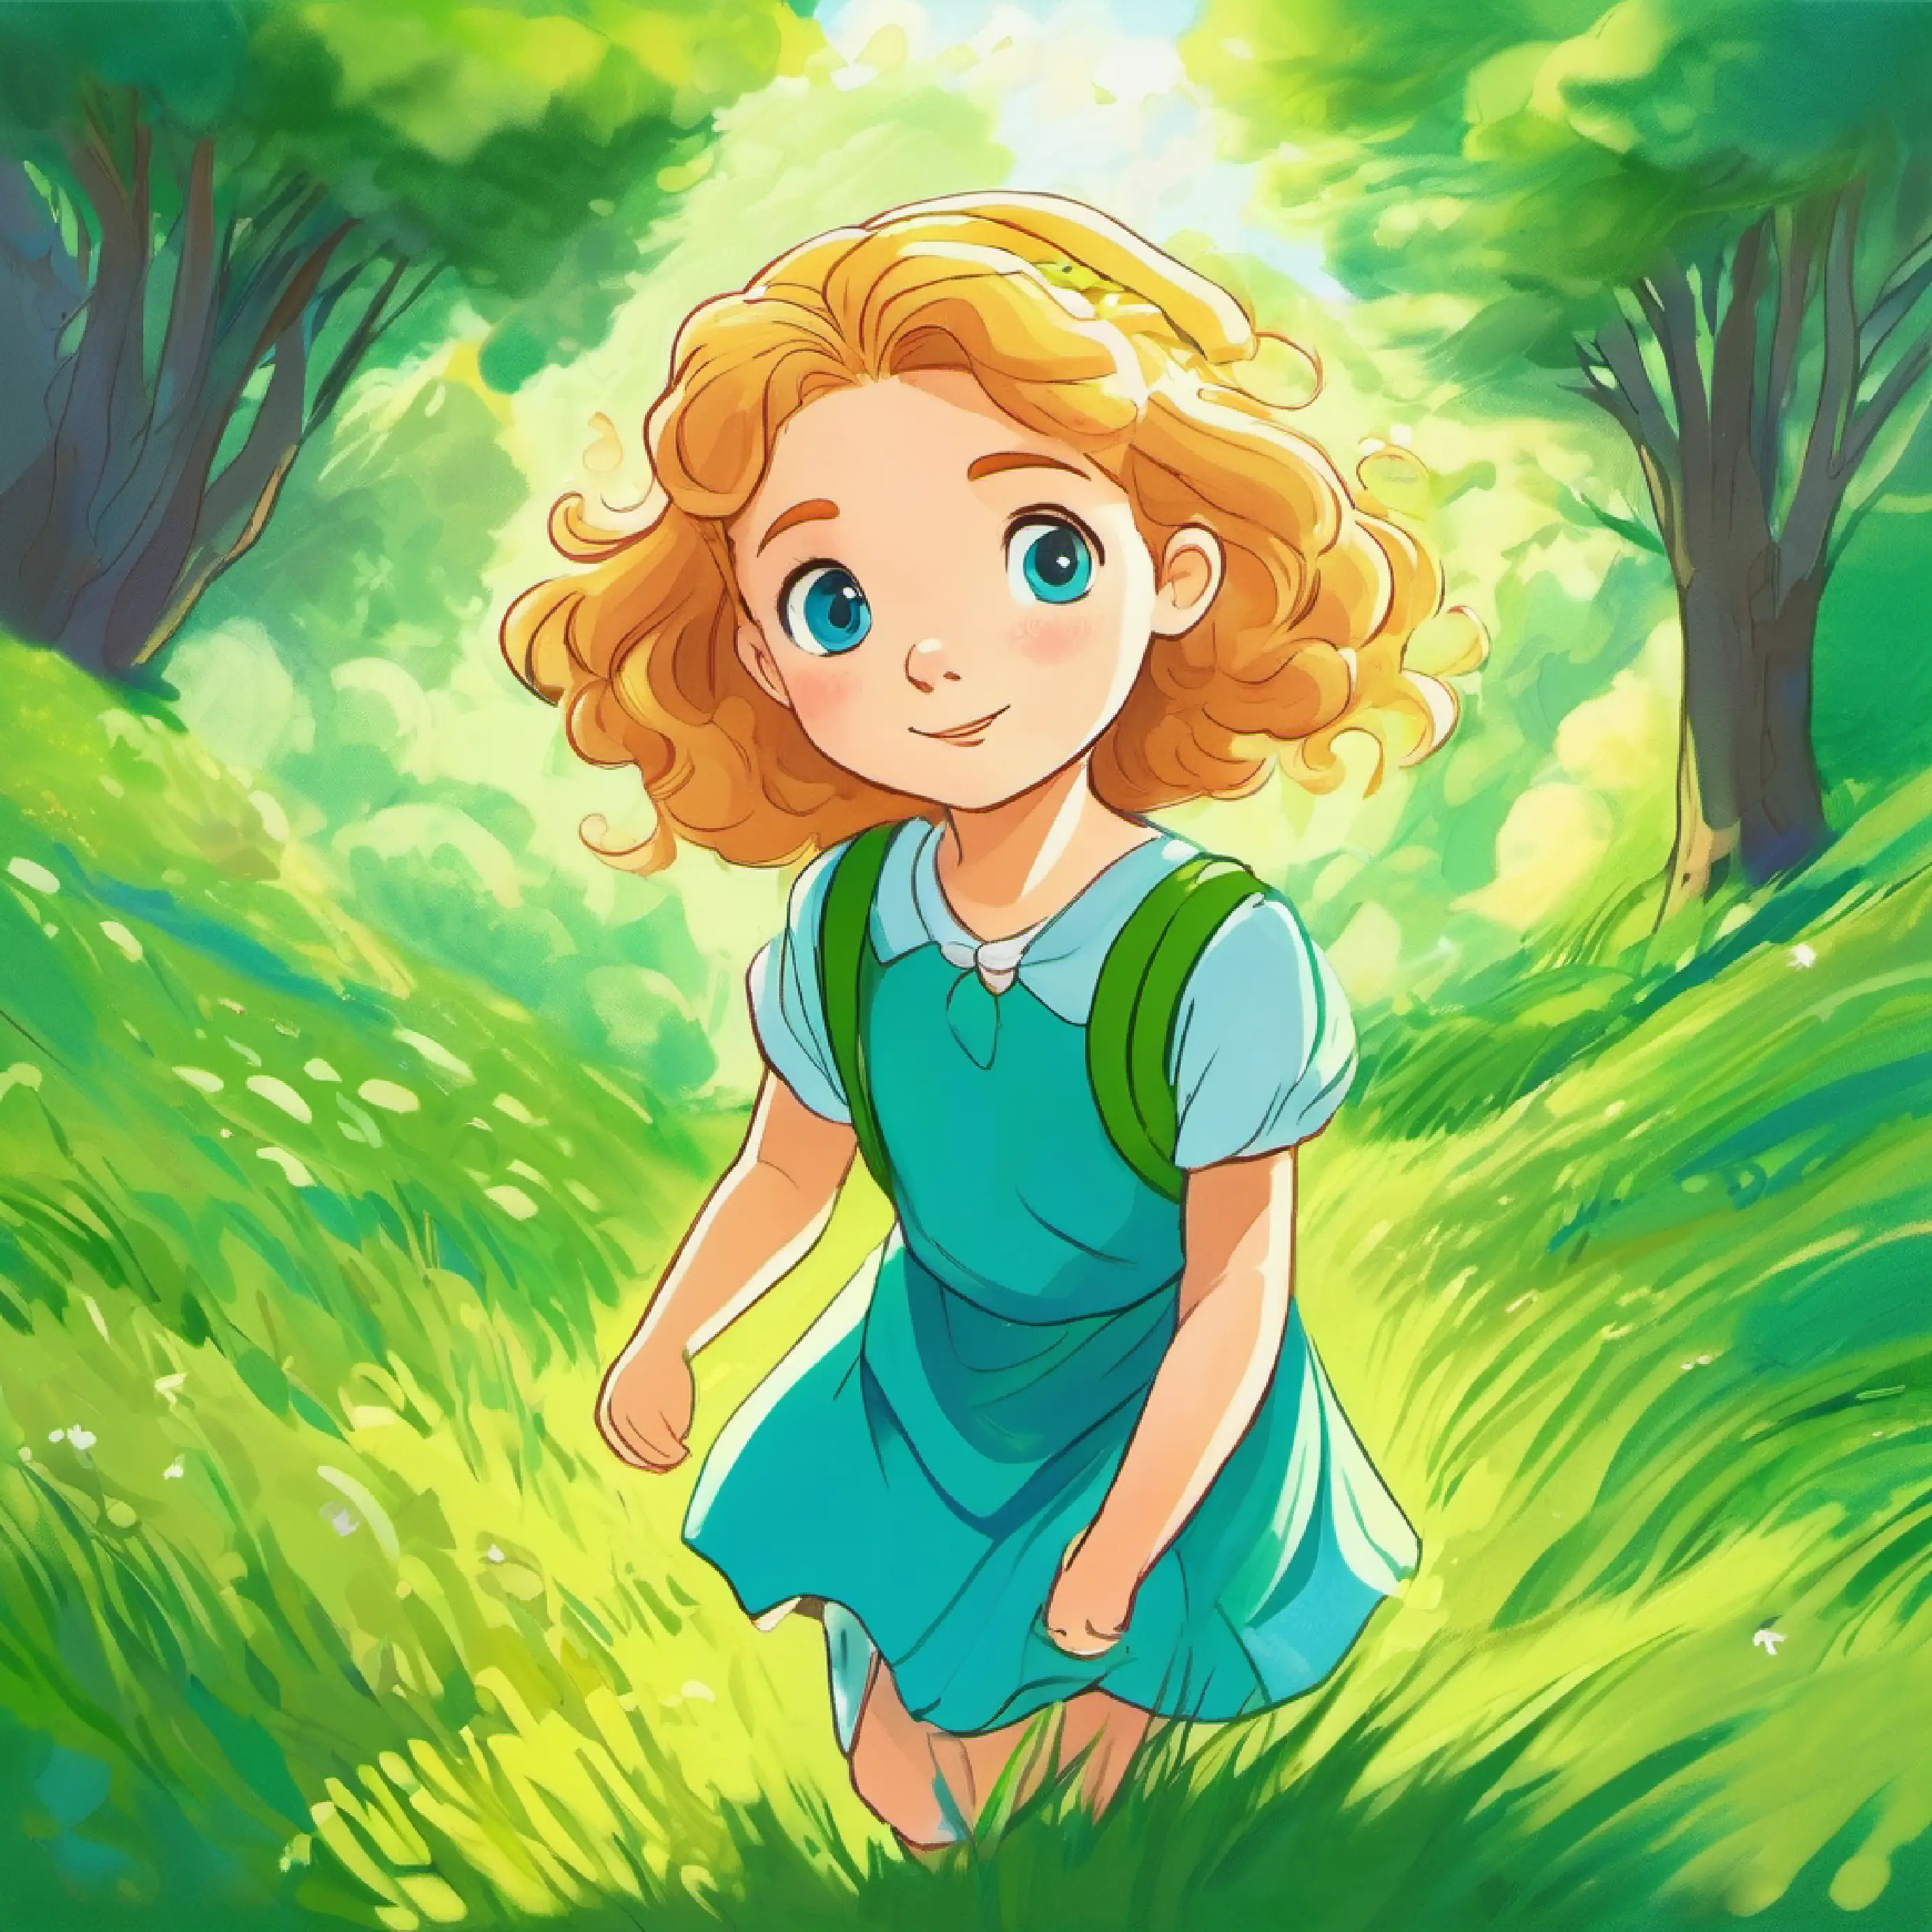 Girl with sunny hair, full of hope, bright blue eyes, wears a green dress stands firm on the ground, ready for new challenges.